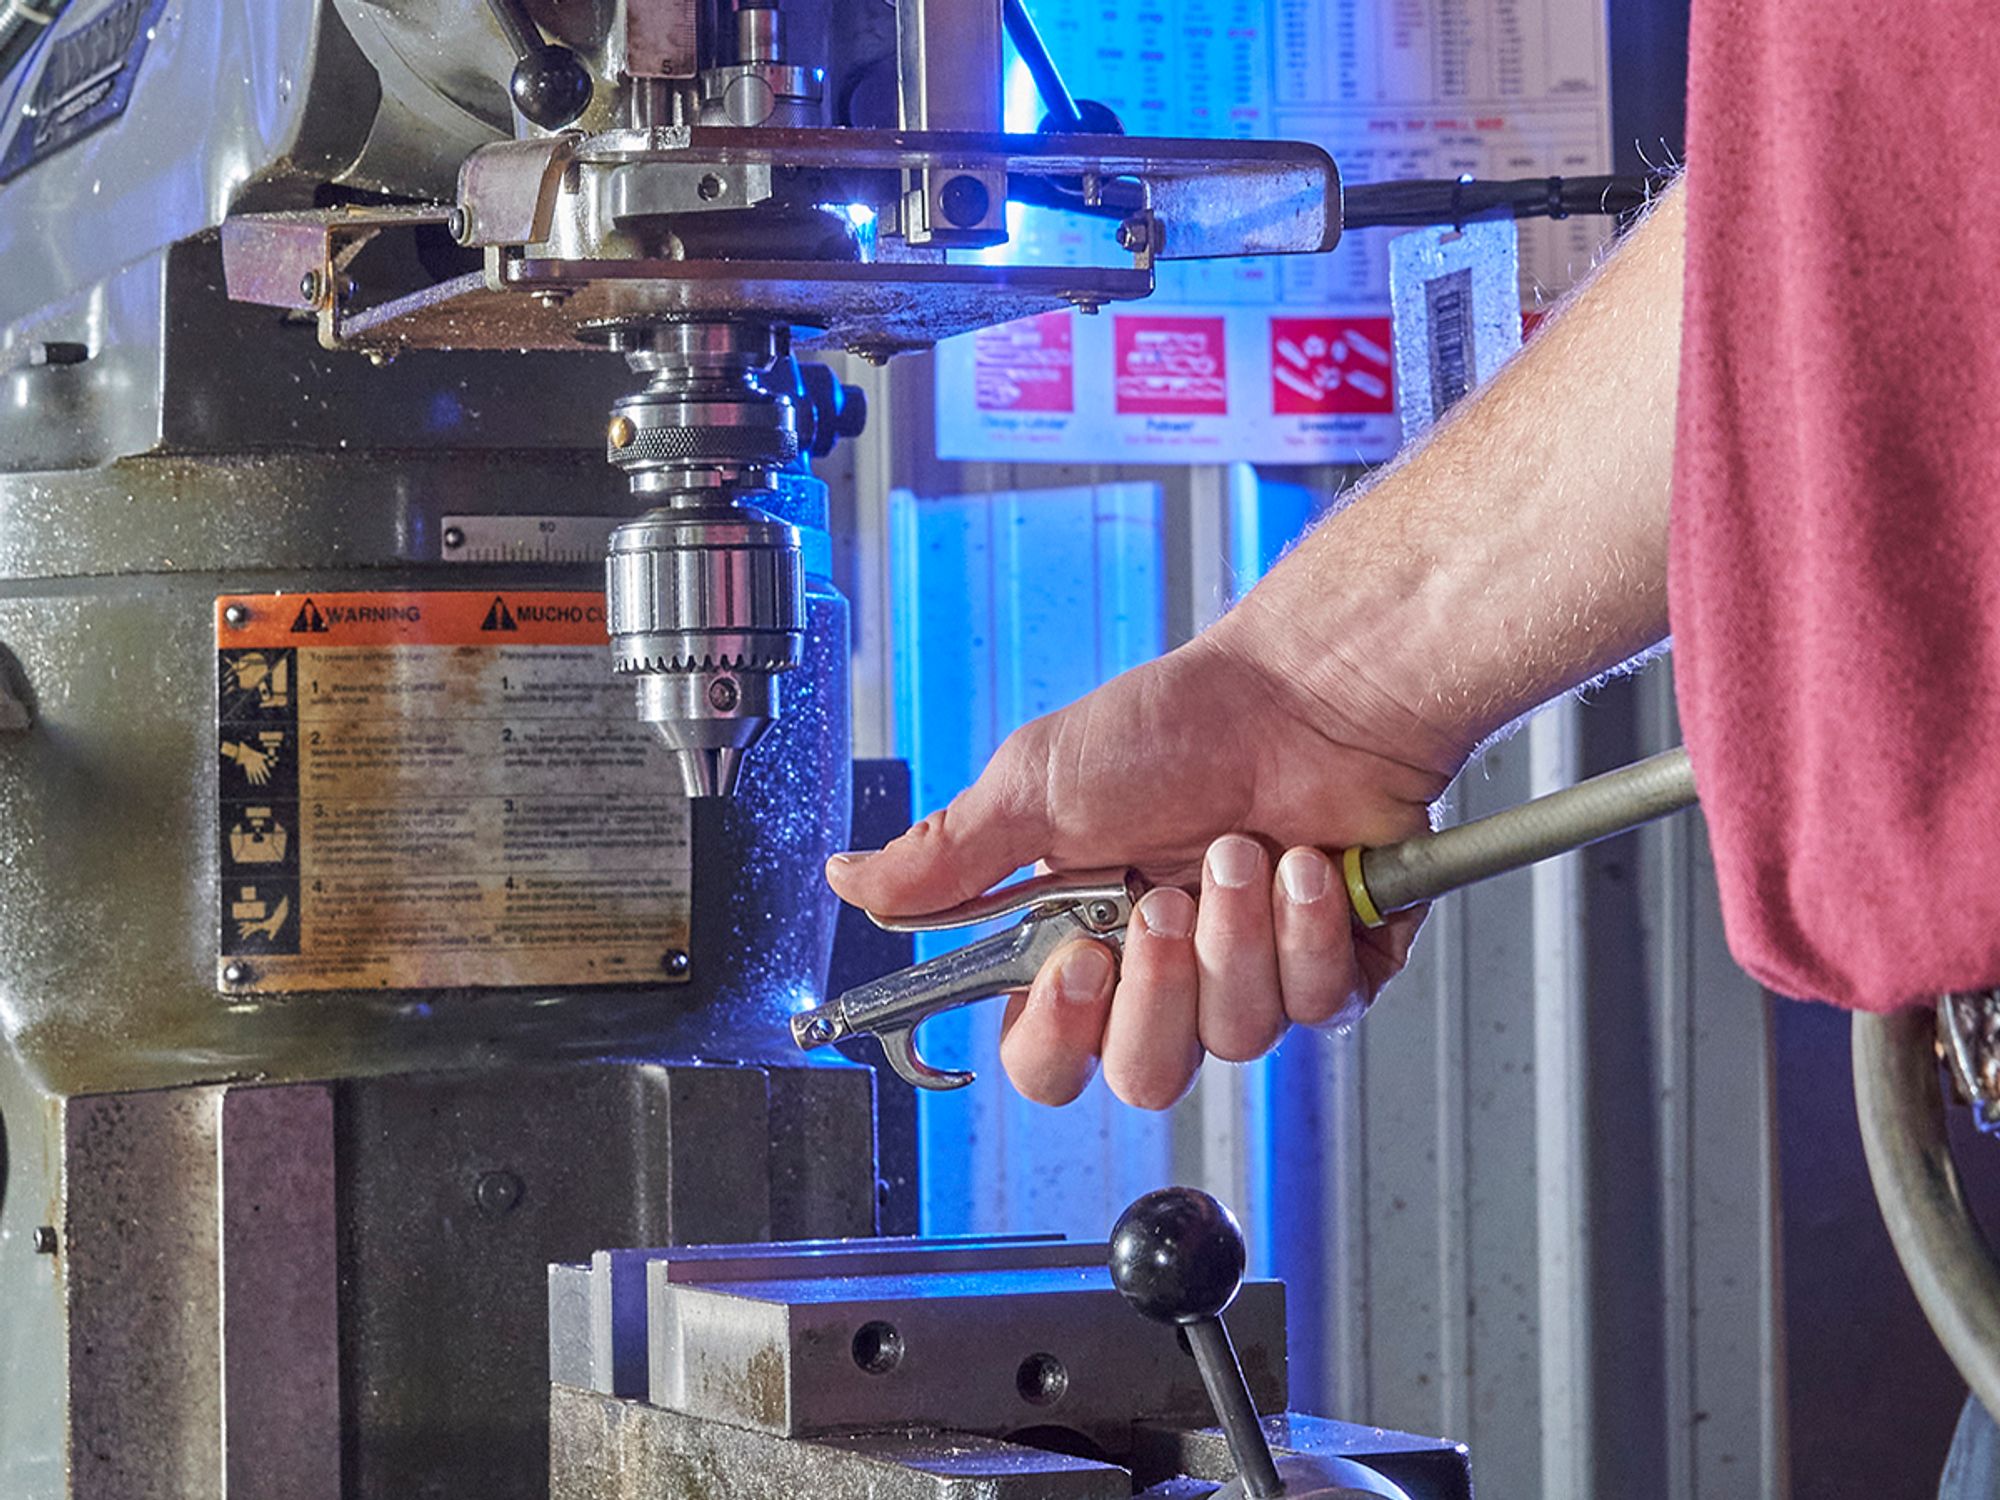 What should employers look for when inspecting drill presses?